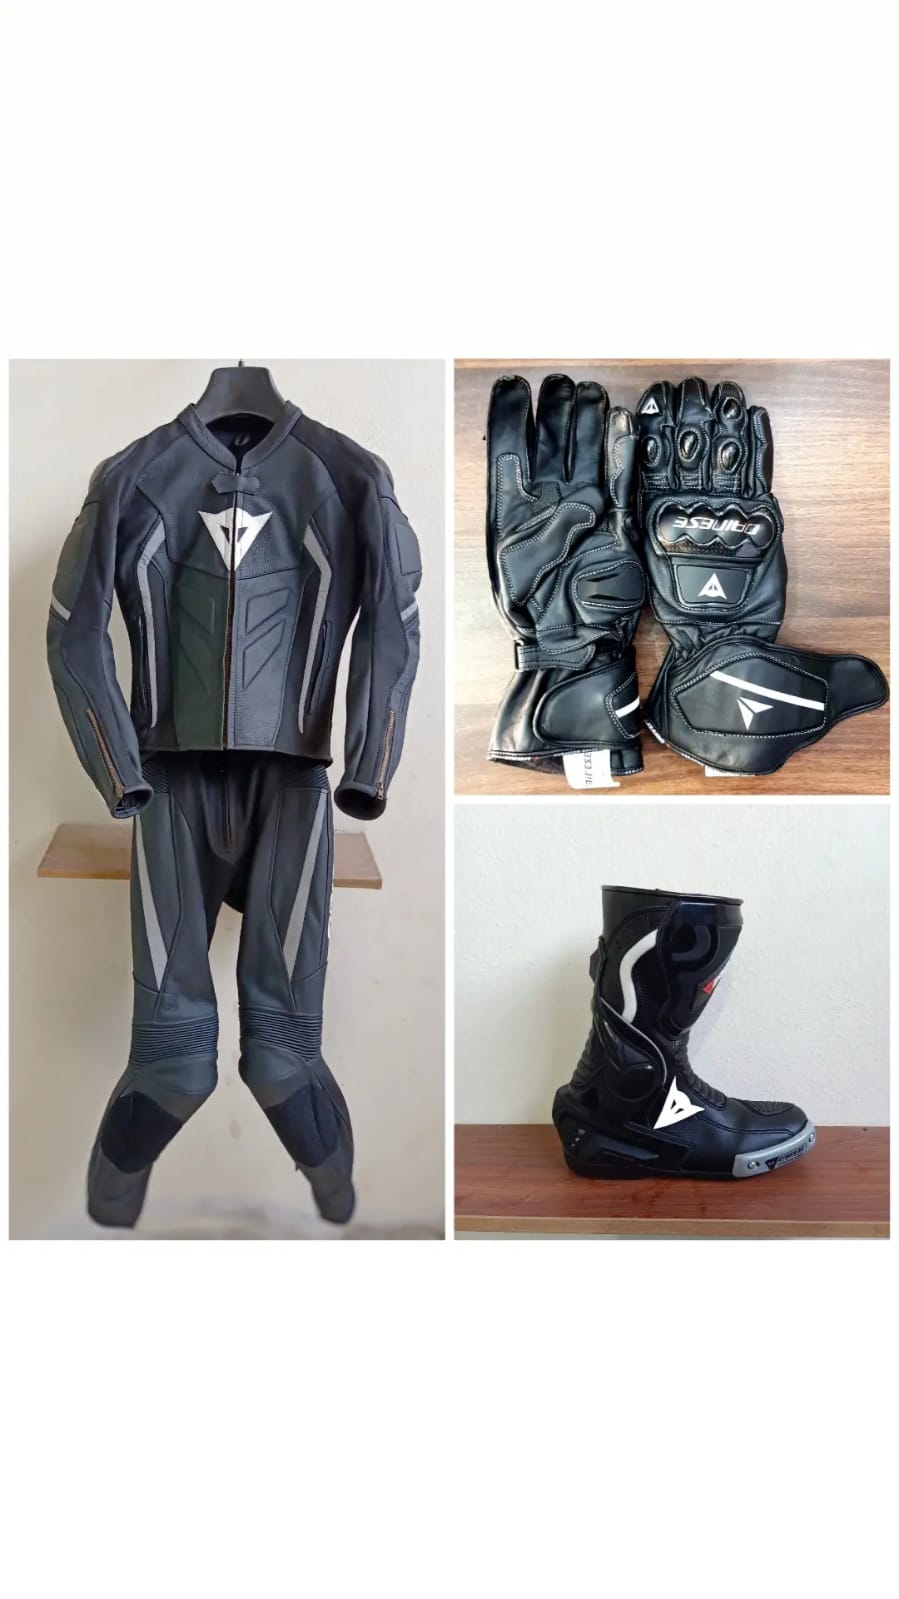  Grey Black Avro D2 2 Piece Motorcycle Leather Racing Suit / Metal D1 Gloves / D1 Boots